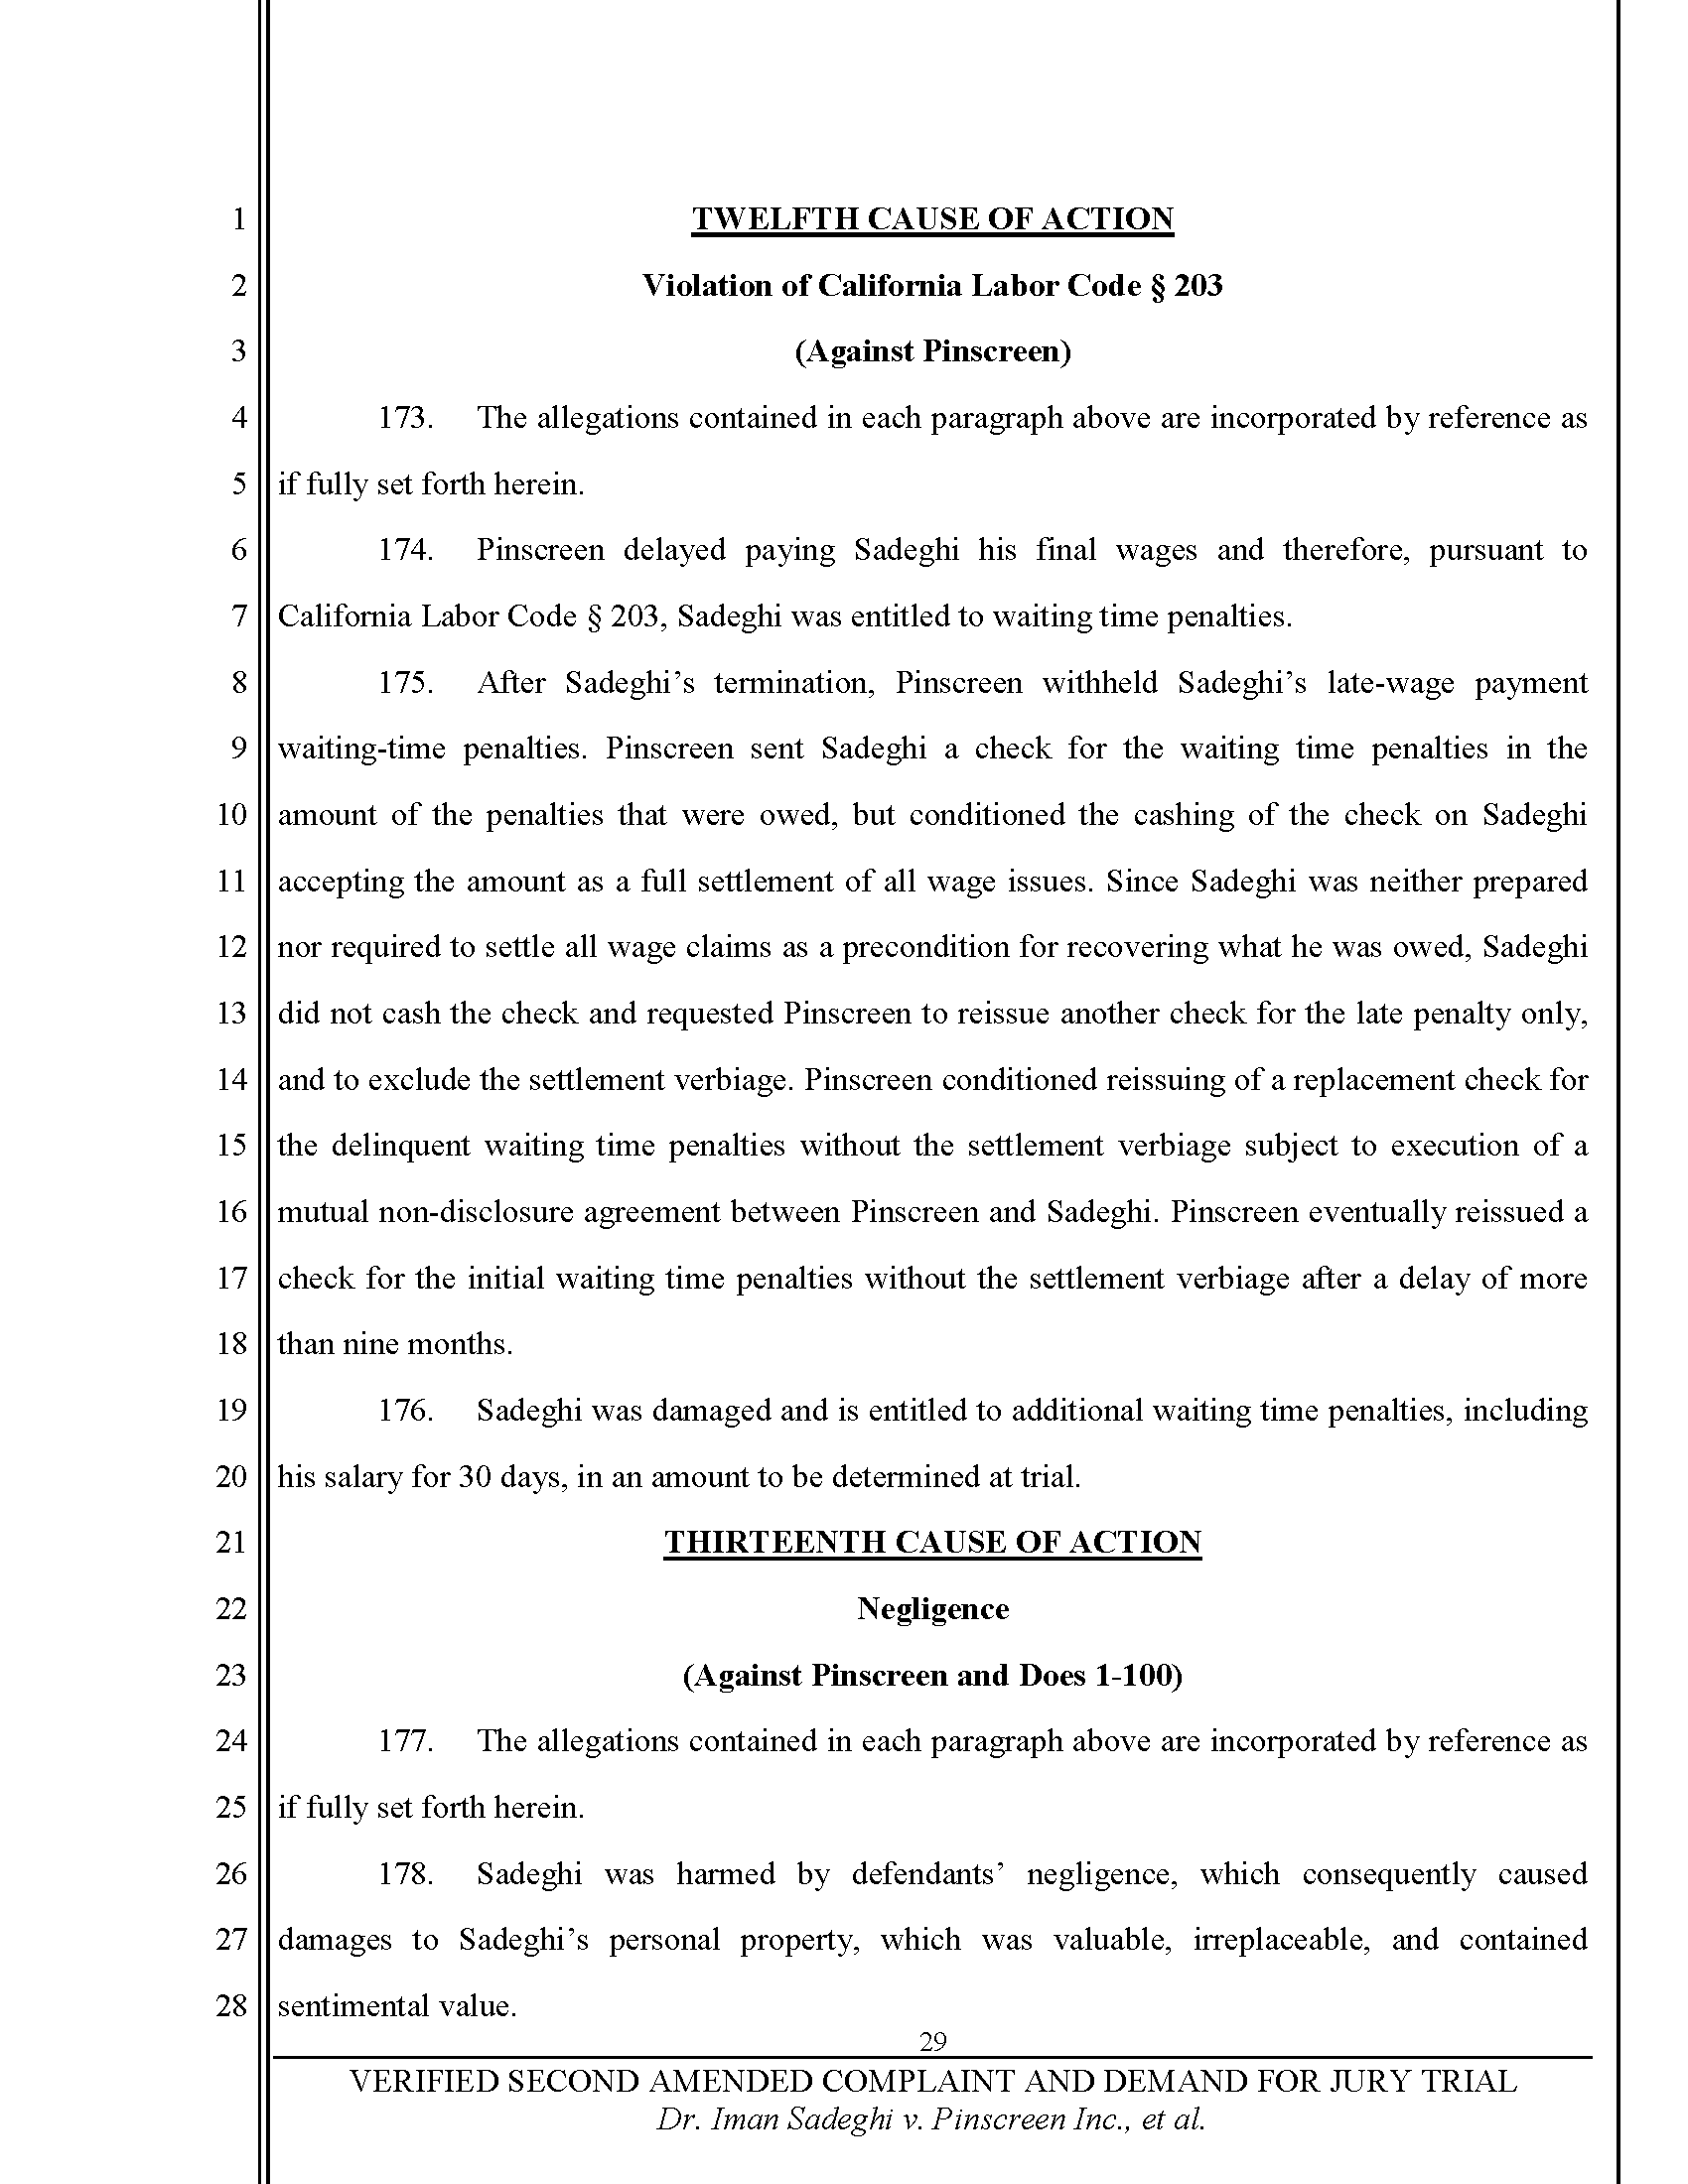 Second Amended Complaint (SAC) Page 30